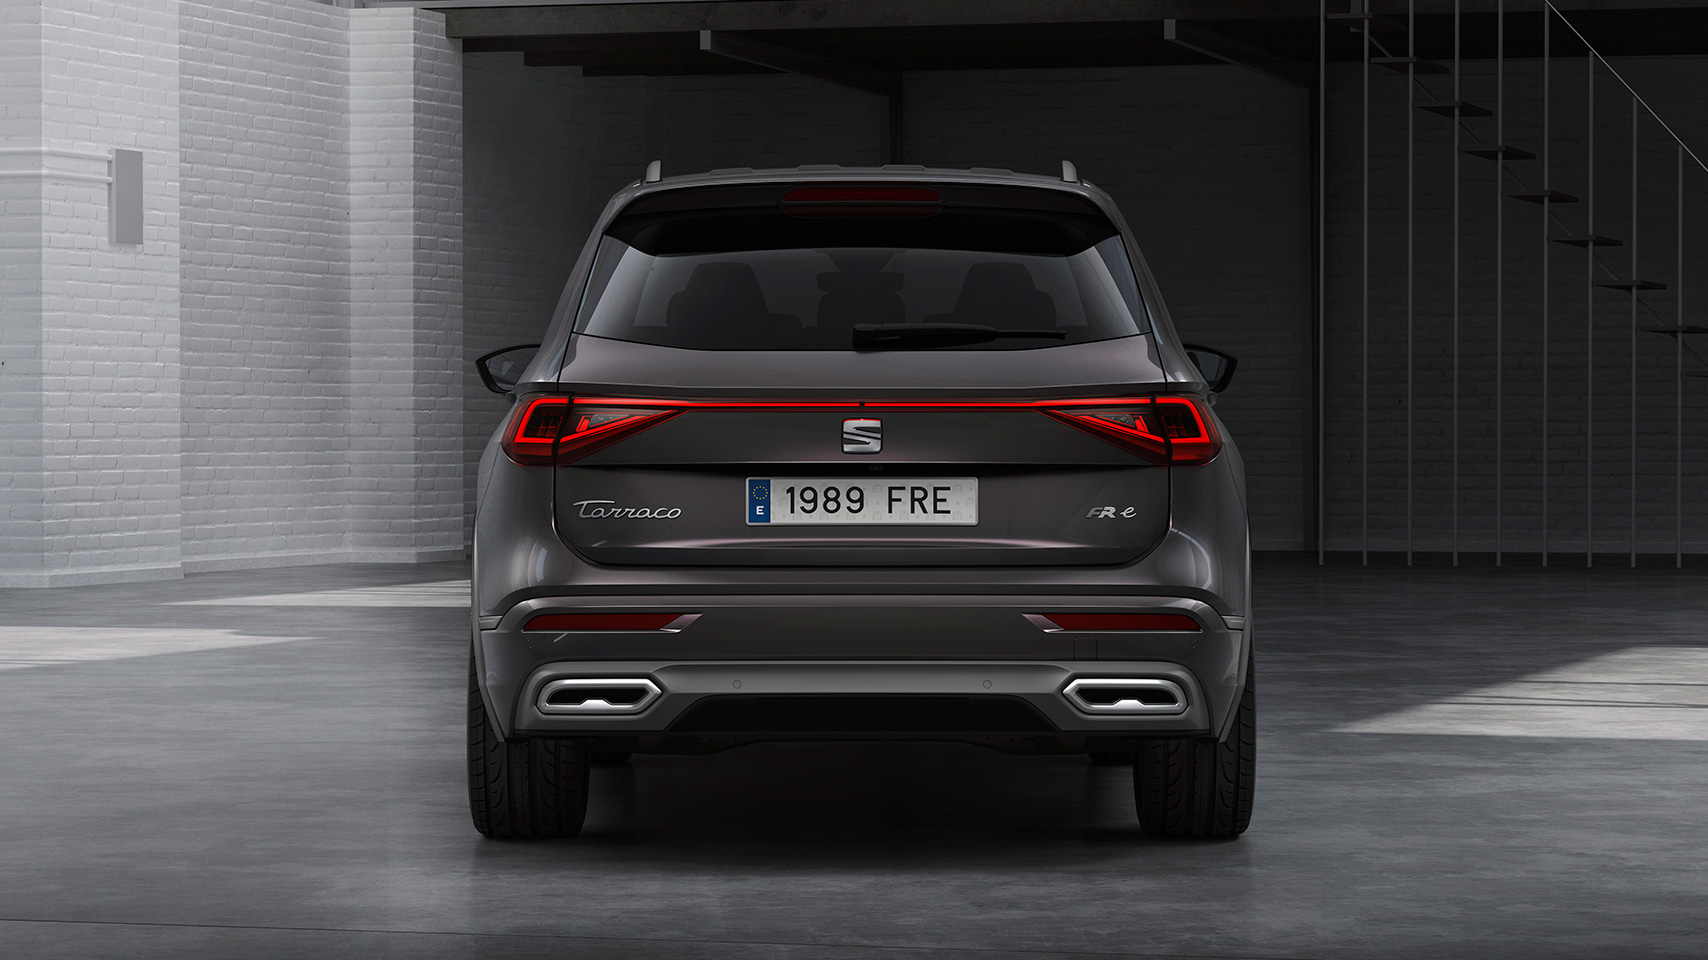 The new SEAT Tarraco FR PHEV, rear view.